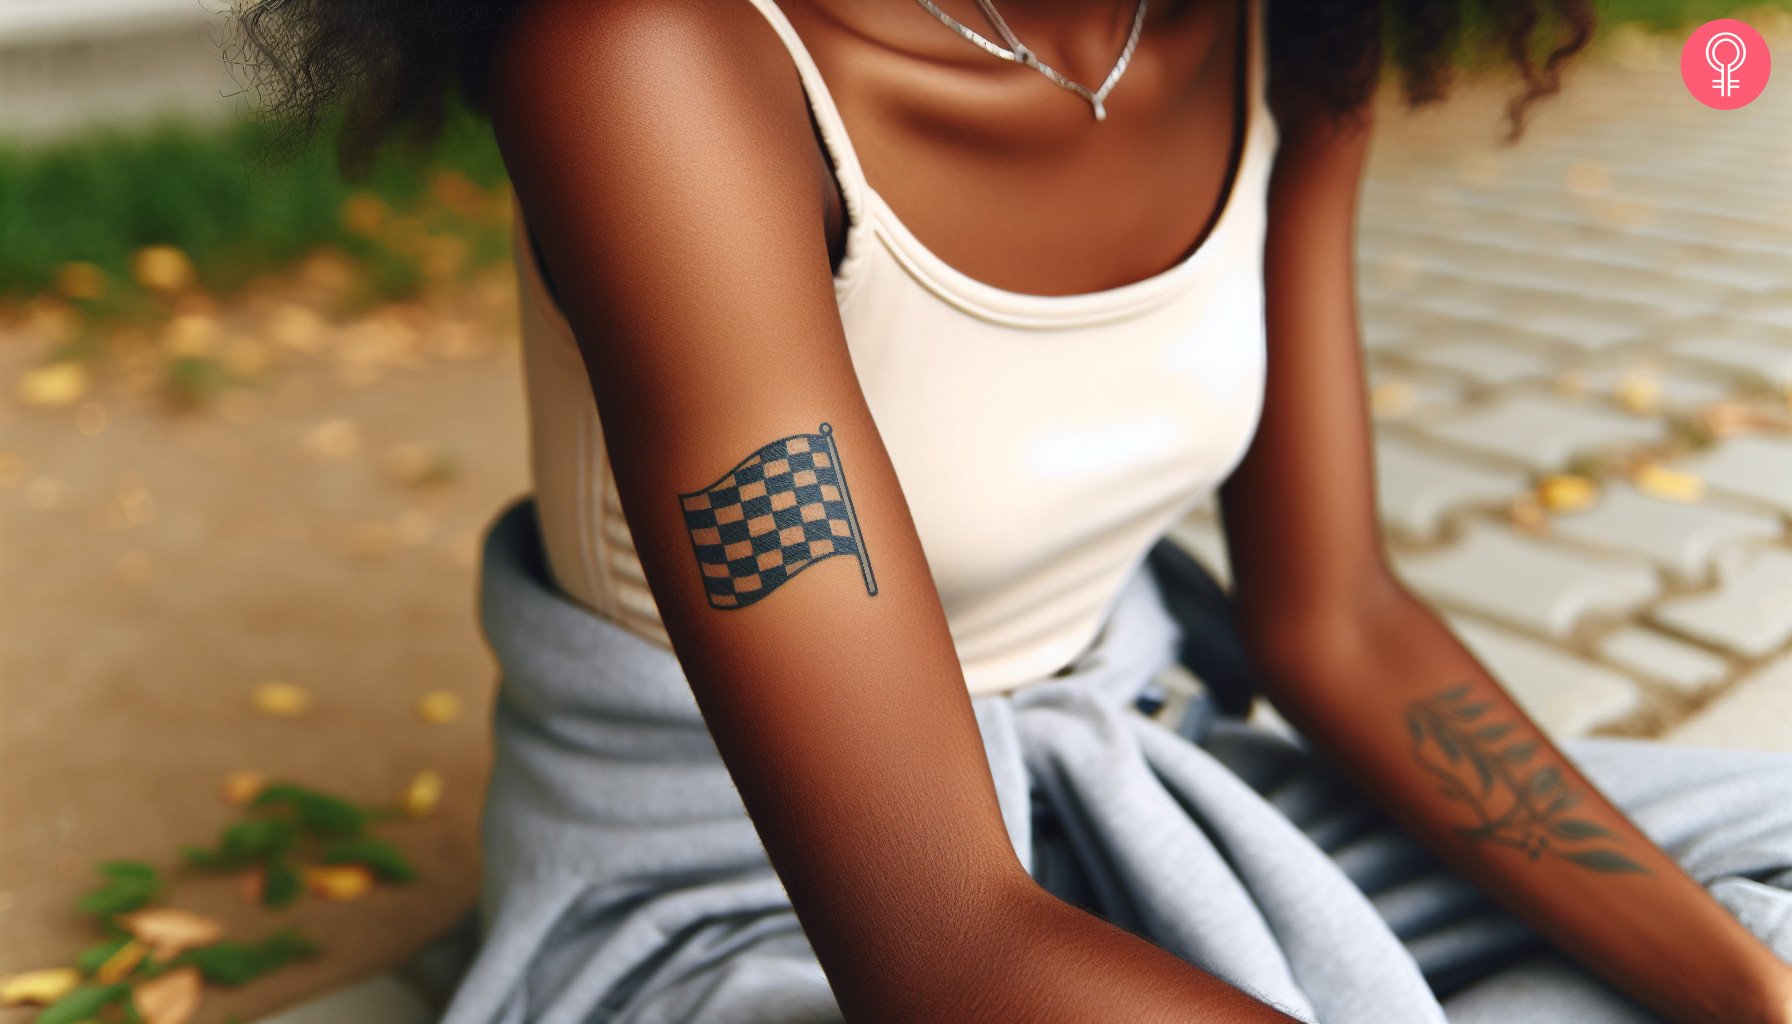 Small checkered flag tattoo on a a woman’s arm